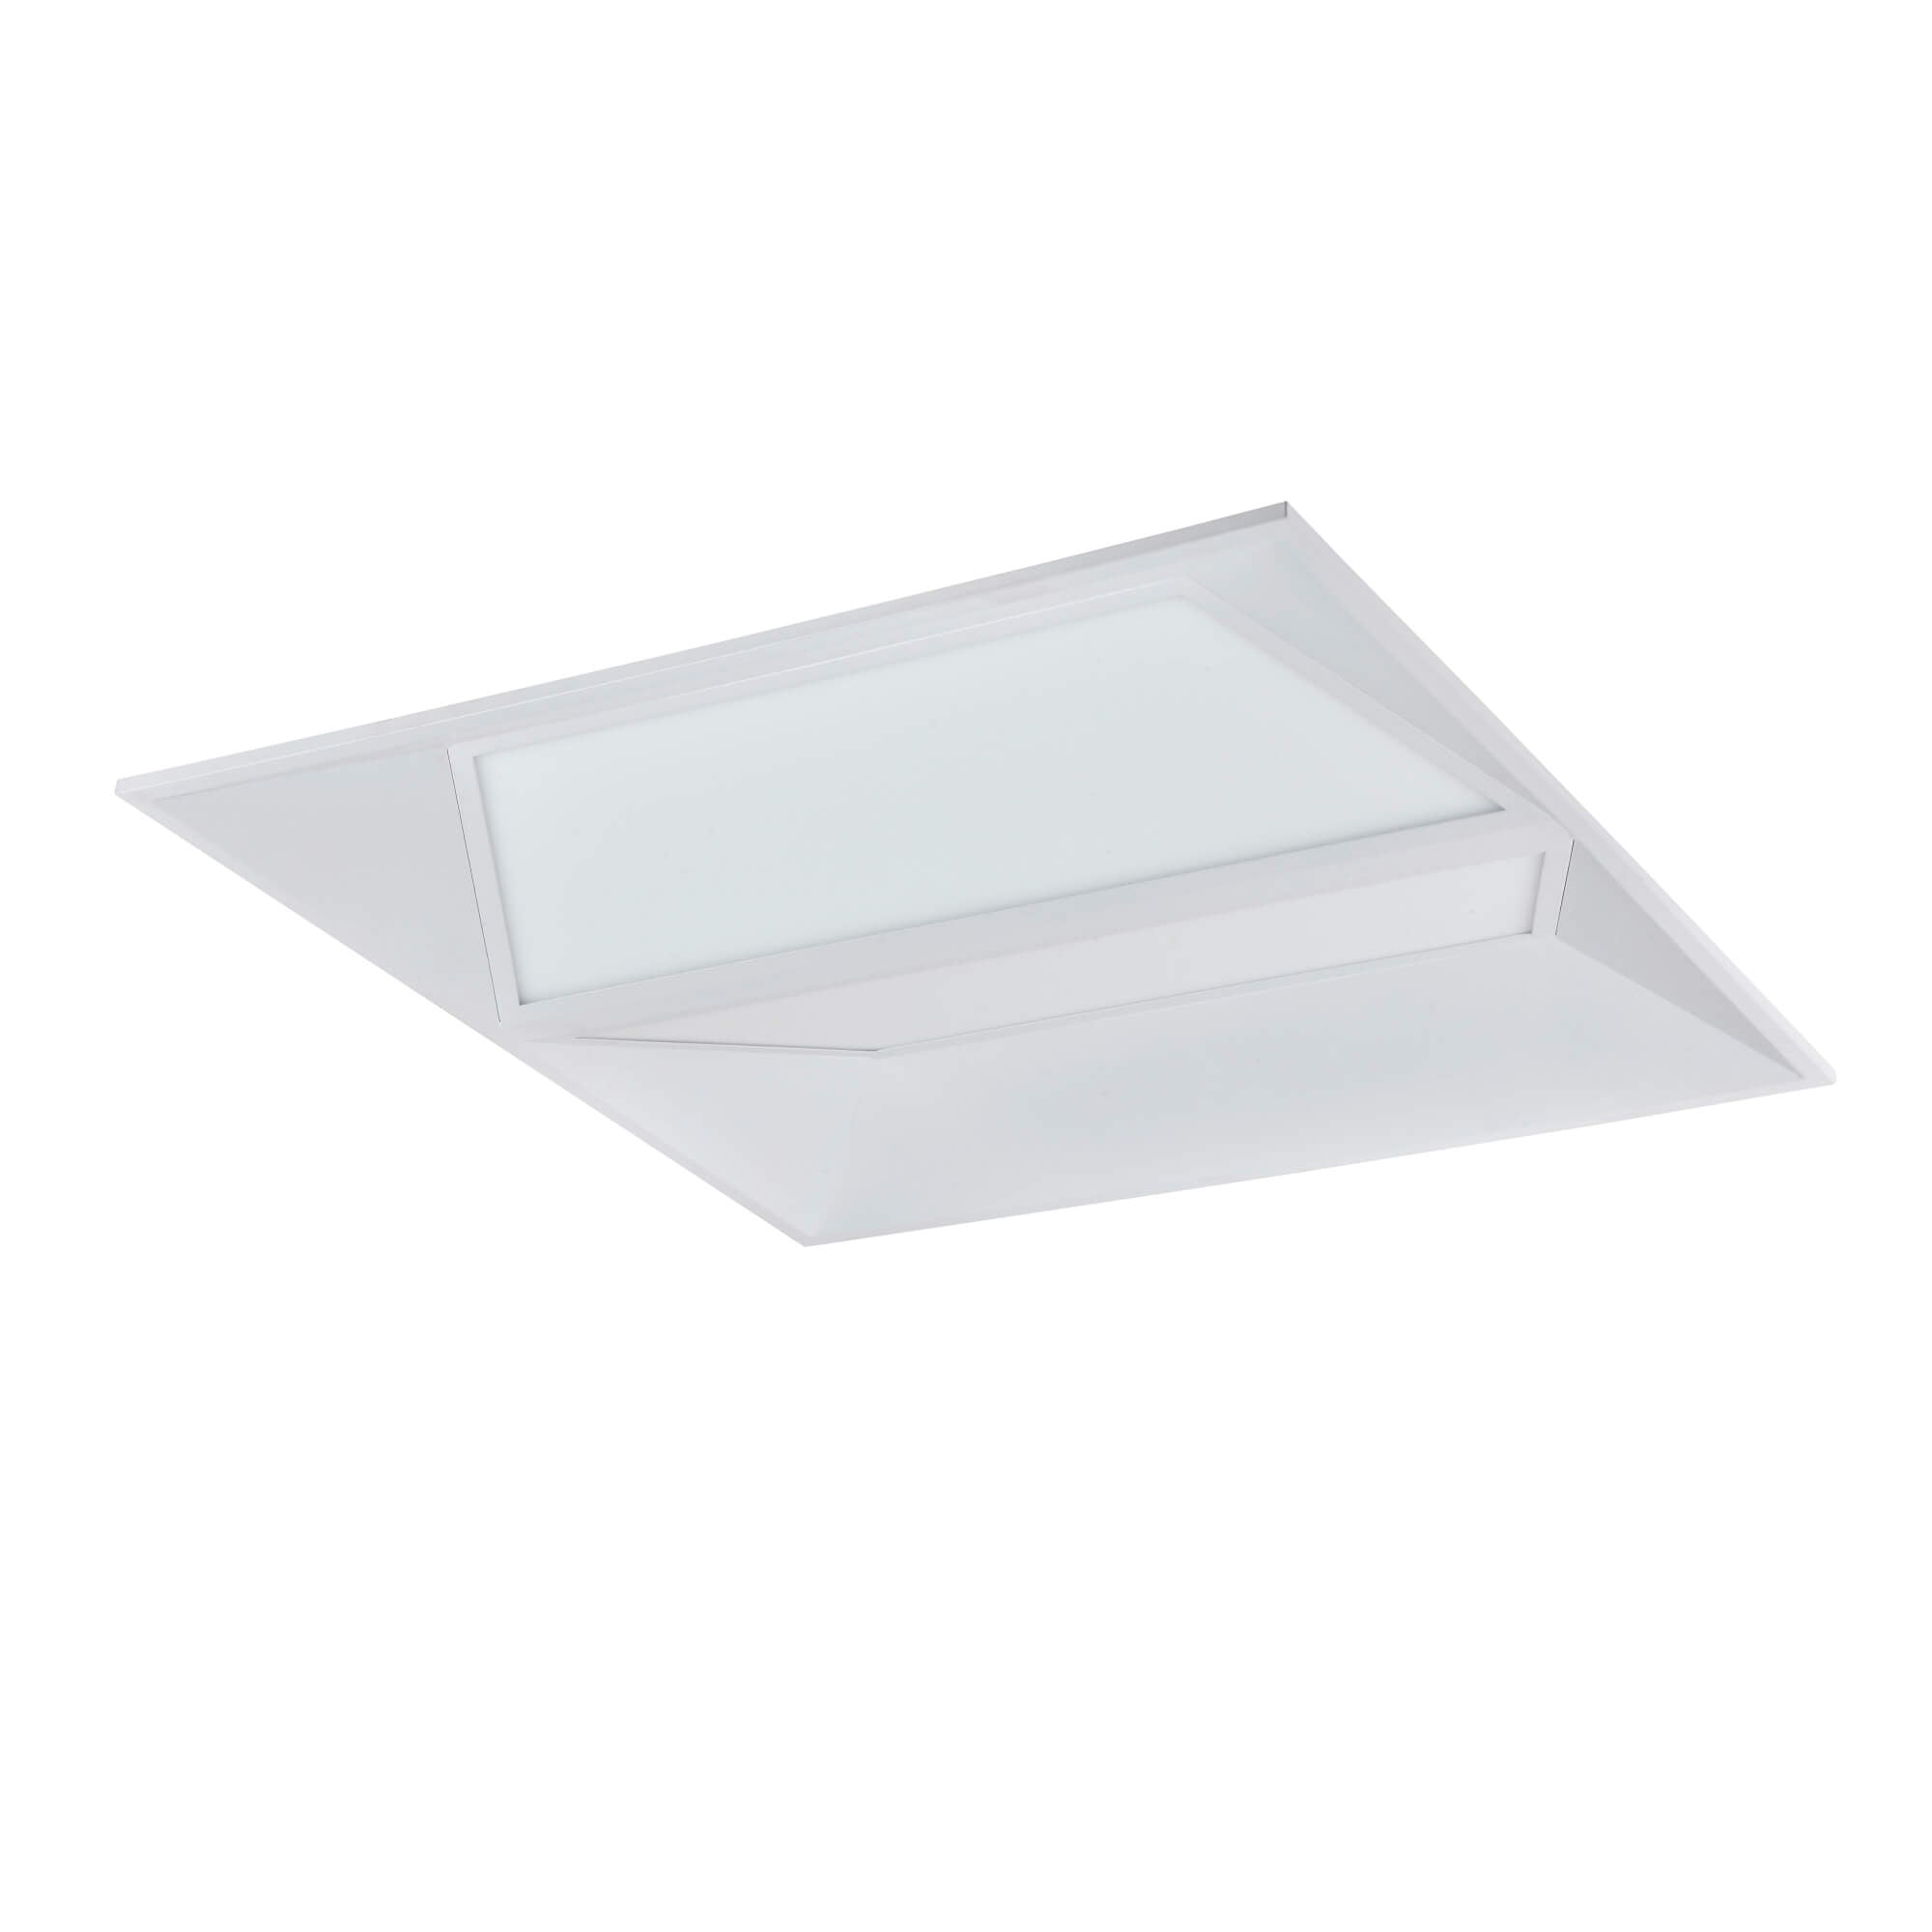 Halcon Indirect LED Troffer Light E1805 for efficient, high-performance commercial lighting